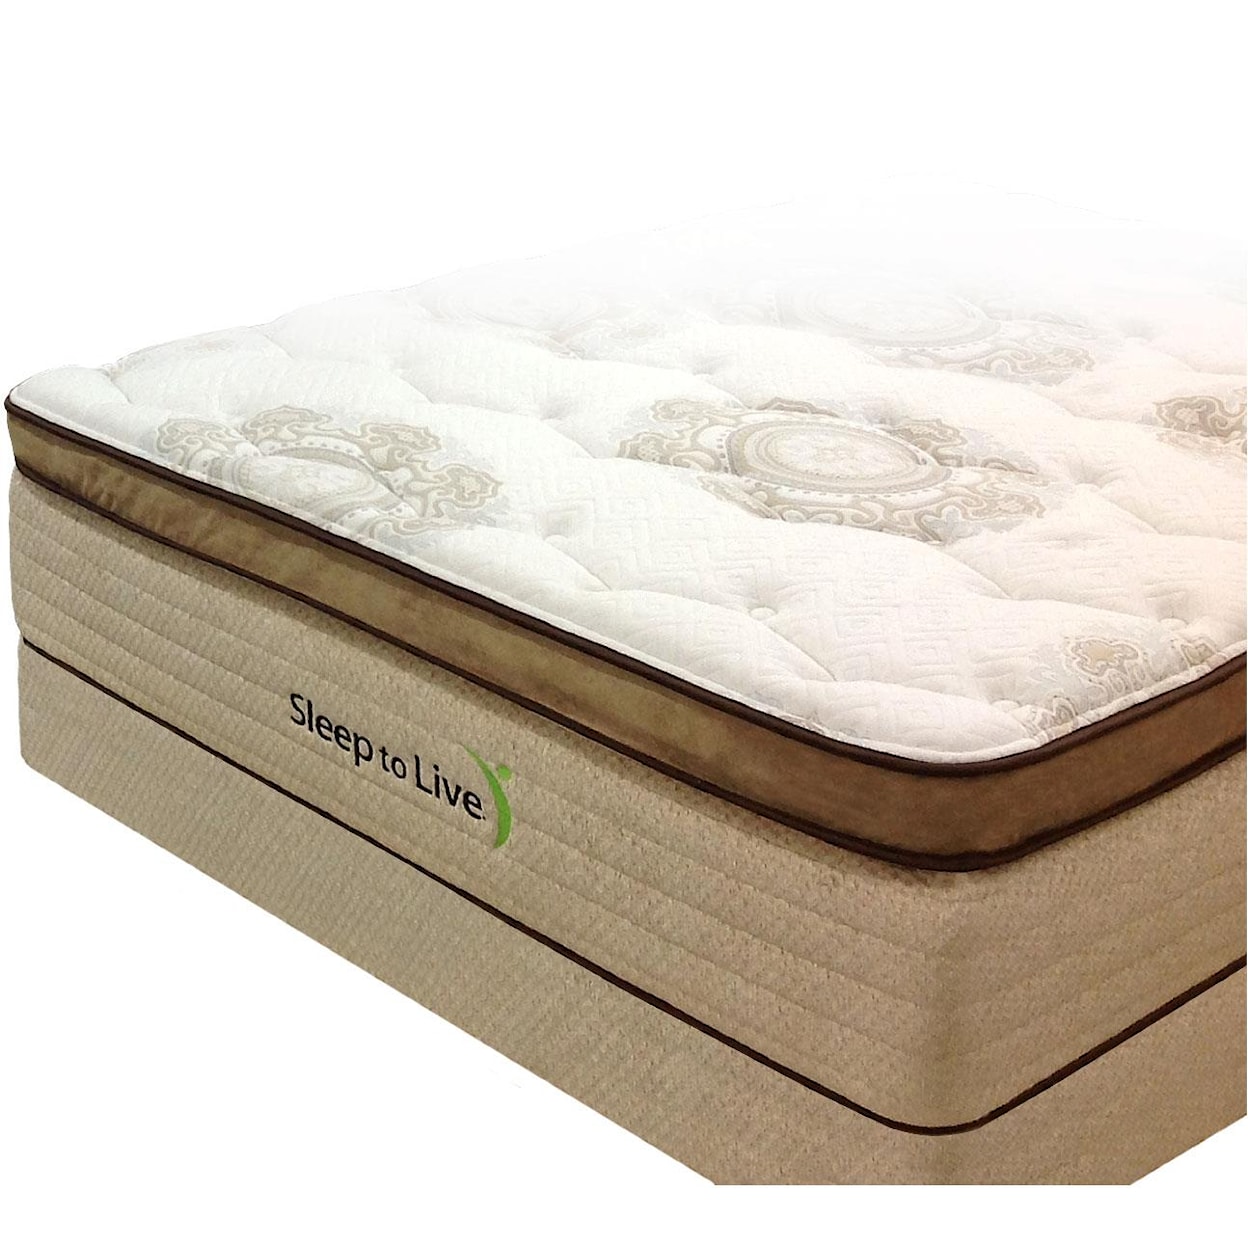 Kingsdown Body System 2 Queen Pocketed Coil Mattress Set